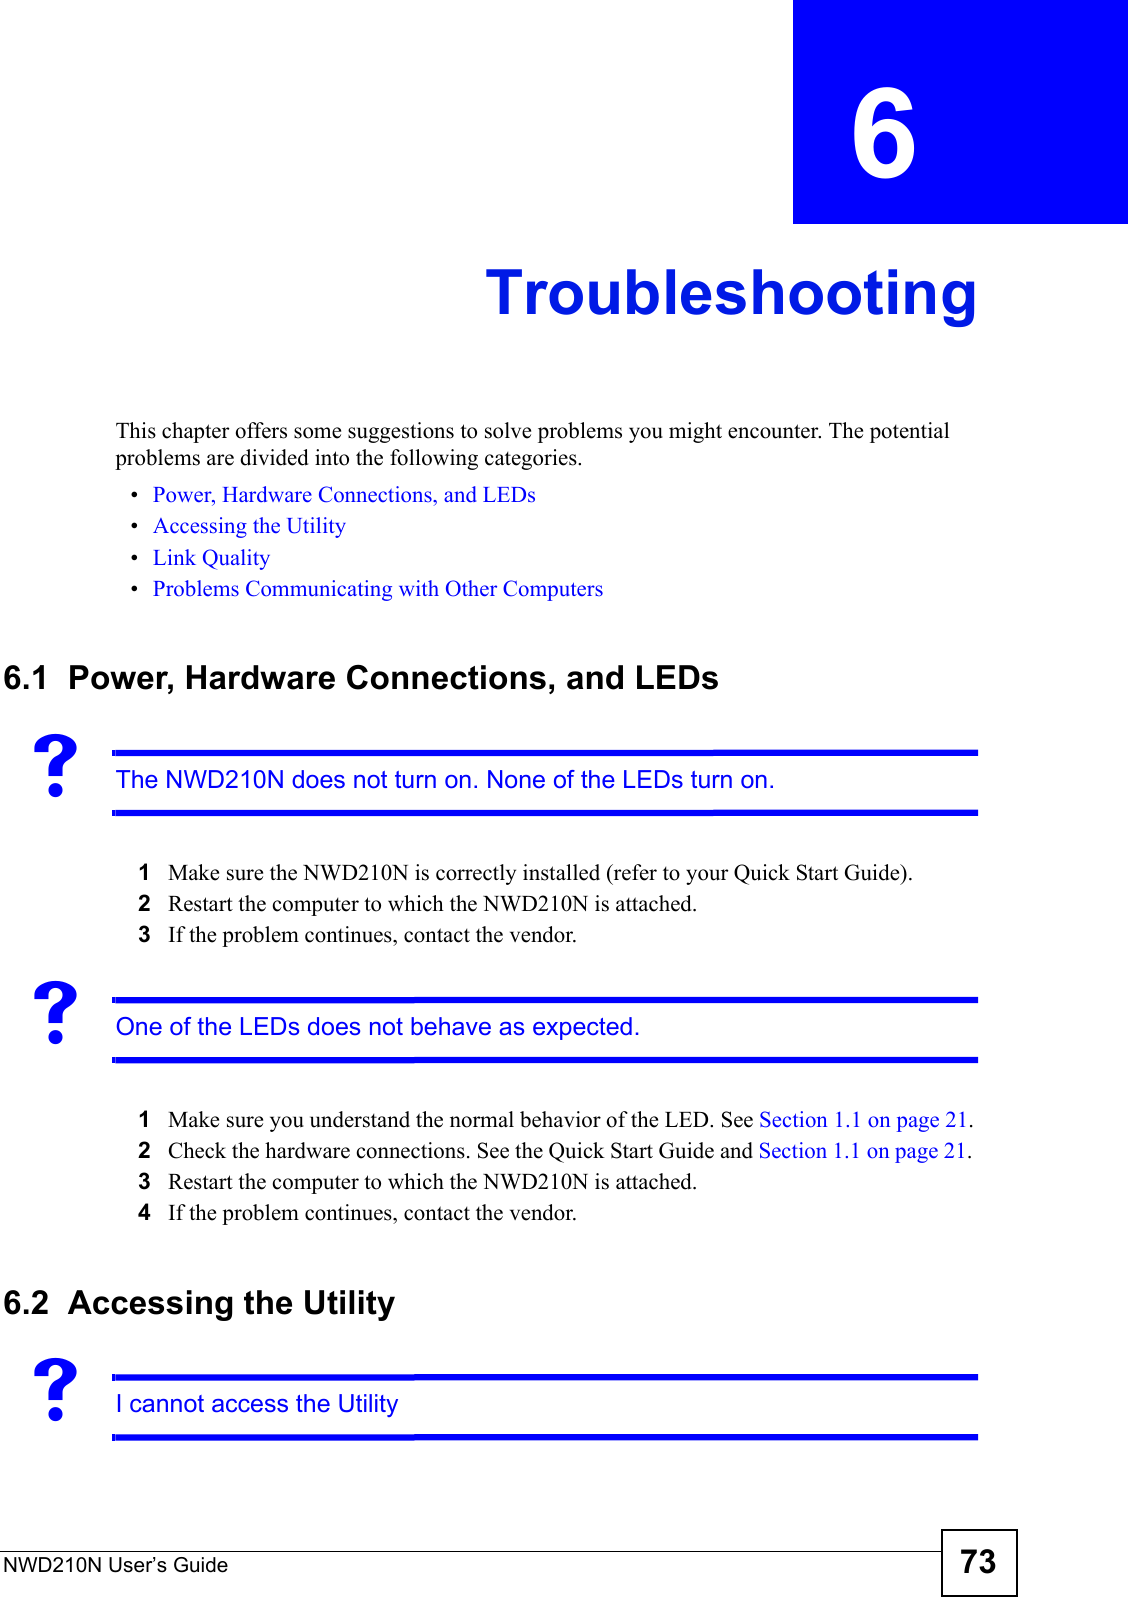 NWD210N User’s Guide 73CHAPTER  6 TroubleshootingThis chapter offers some suggestions to solve problems you might encounter. The potential problems are divided into the following categories. •Power, Hardware Connections, and LEDs•Accessing the Utility•Link Quality•Problems Communicating with Other Computers6.1  Power, Hardware Connections, and LEDsVThe NWD210N does not turn on. None of the LEDs turn on.1Make sure the NWD210N is correctly installed (refer to your Quick Start Guide).2Restart the computer to which the NWD210N is attached.3If the problem continues, contact the vendor.VOne of the LEDs does not behave as expected.1Make sure you understand the normal behavior of the LED. See Section 1.1 on page 21.2Check the hardware connections. See the Quick Start Guide and Section 1.1 on page 21. 3Restart the computer to which the NWD210N is attached.4If the problem continues, contact the vendor.6.2  Accessing the UtilityVI cannot access the Utility